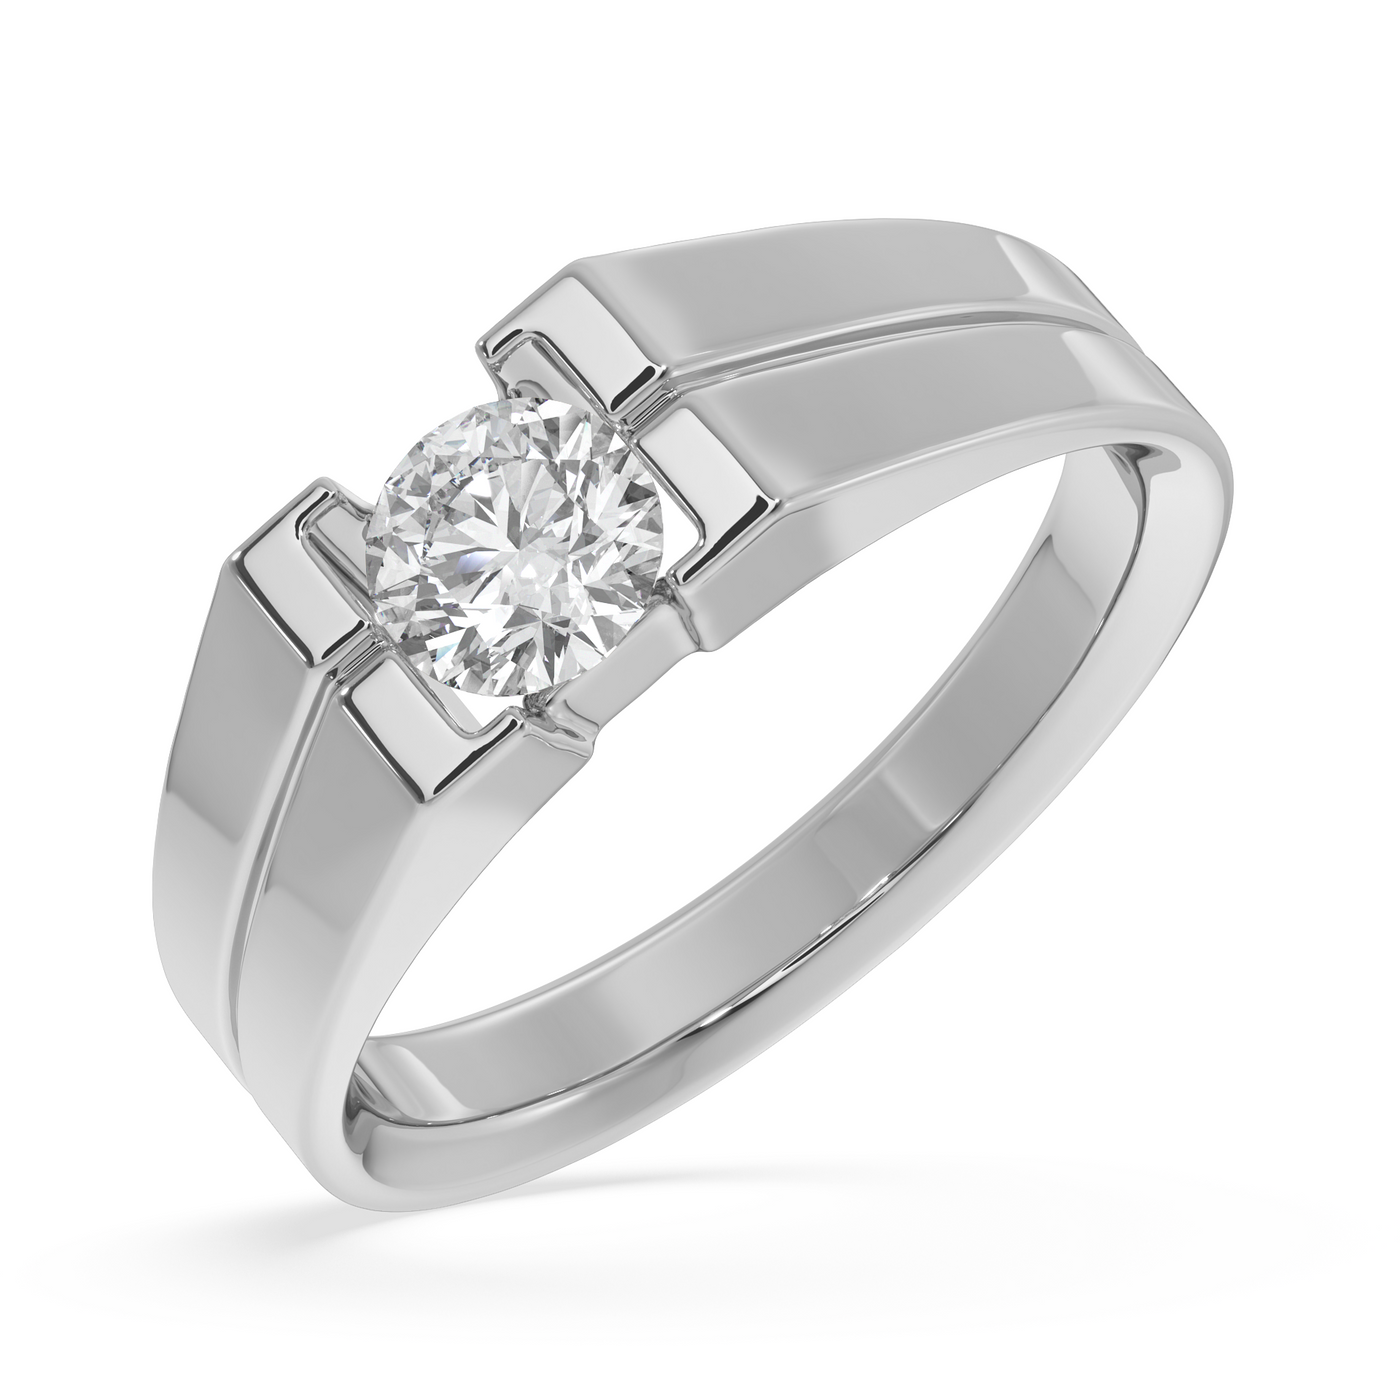 SY Men's Ring in Platinum, Channel-Setting